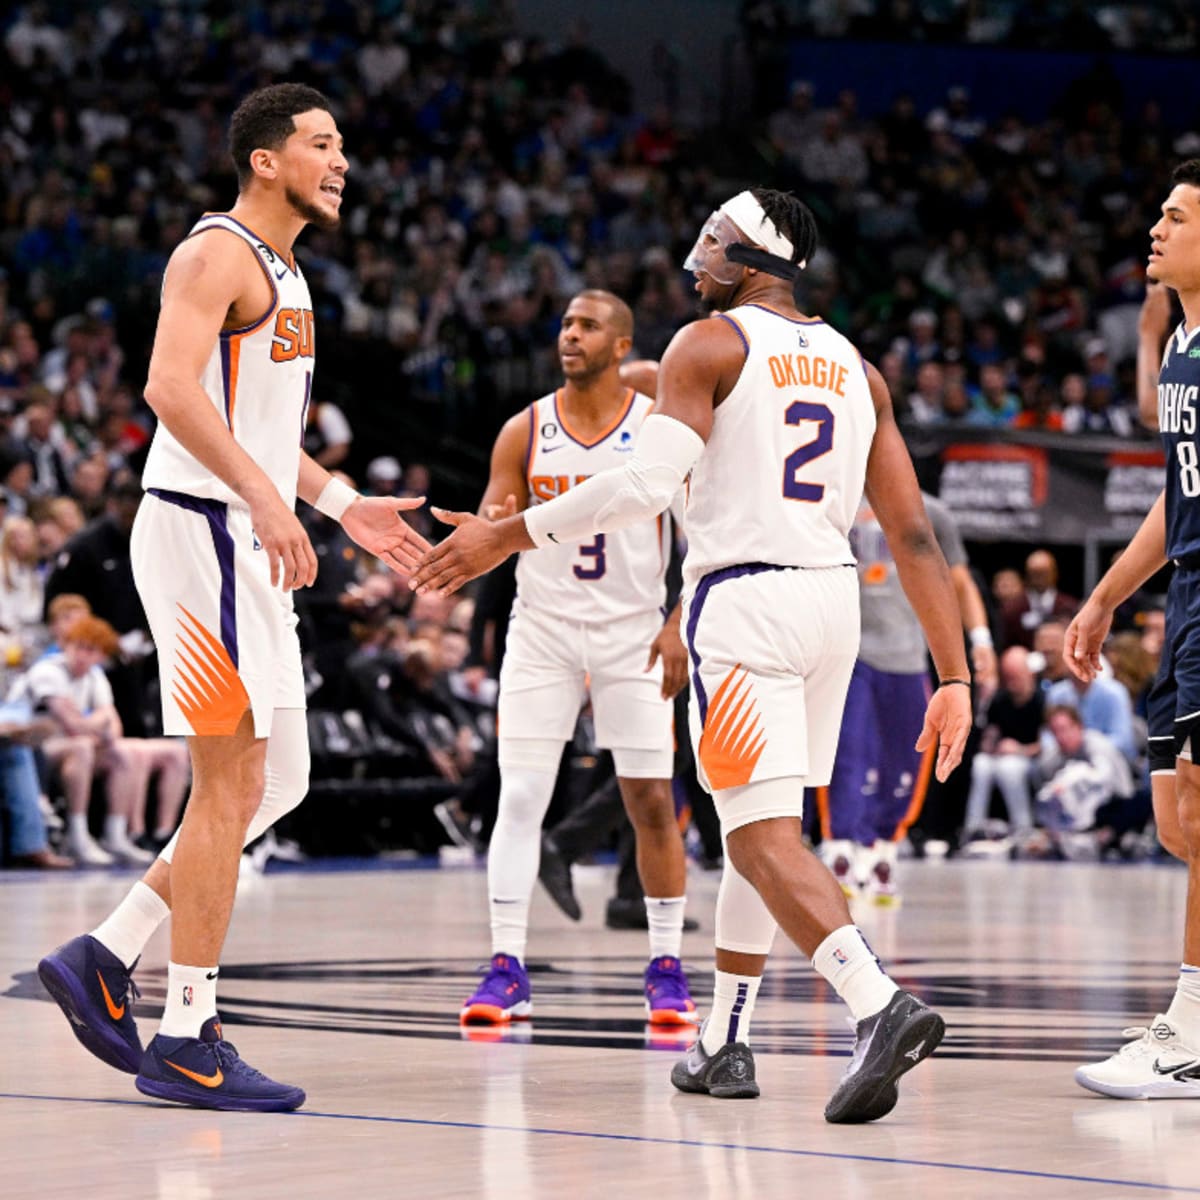 Josh Okogie is Starting For Suns - Here's Why - Sports Illustrated Inside  The Suns News, Analysis and More